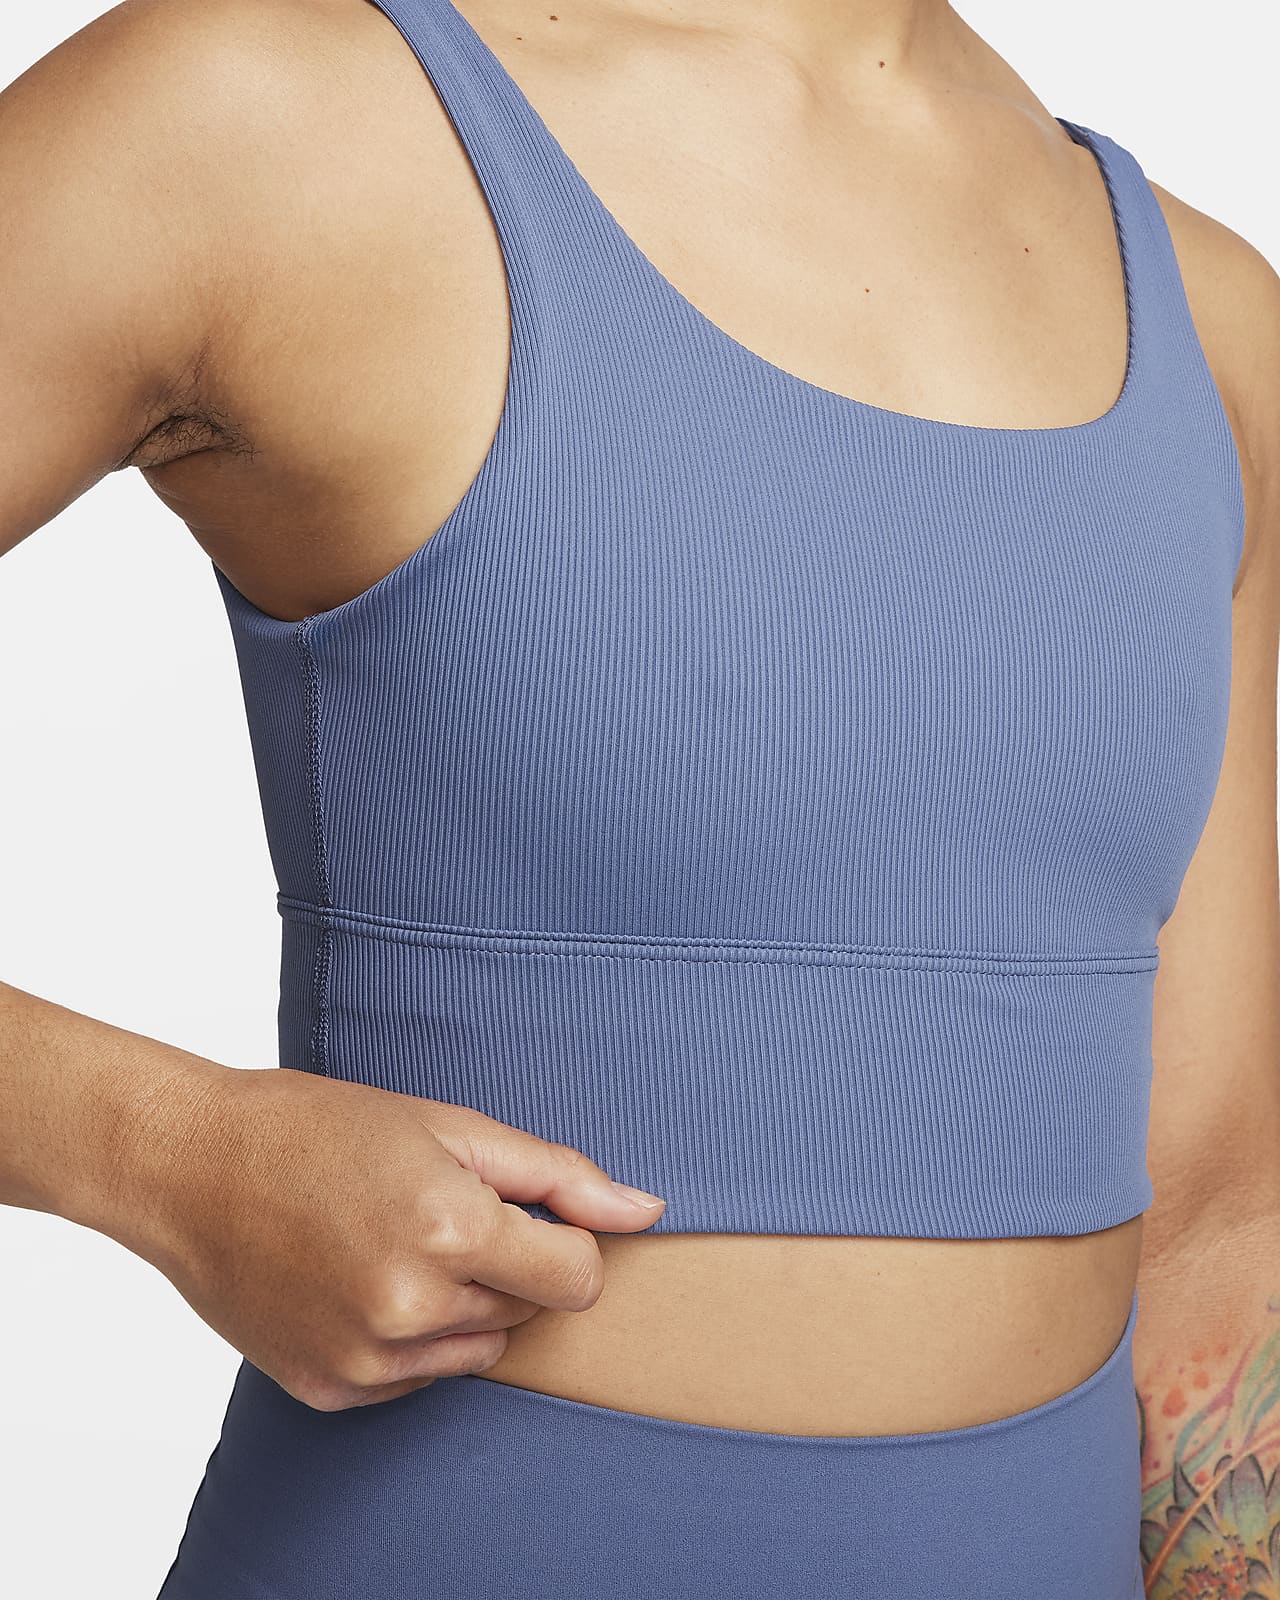 Nike Women's Diffused Blue Light-Support Padded Sports Bra